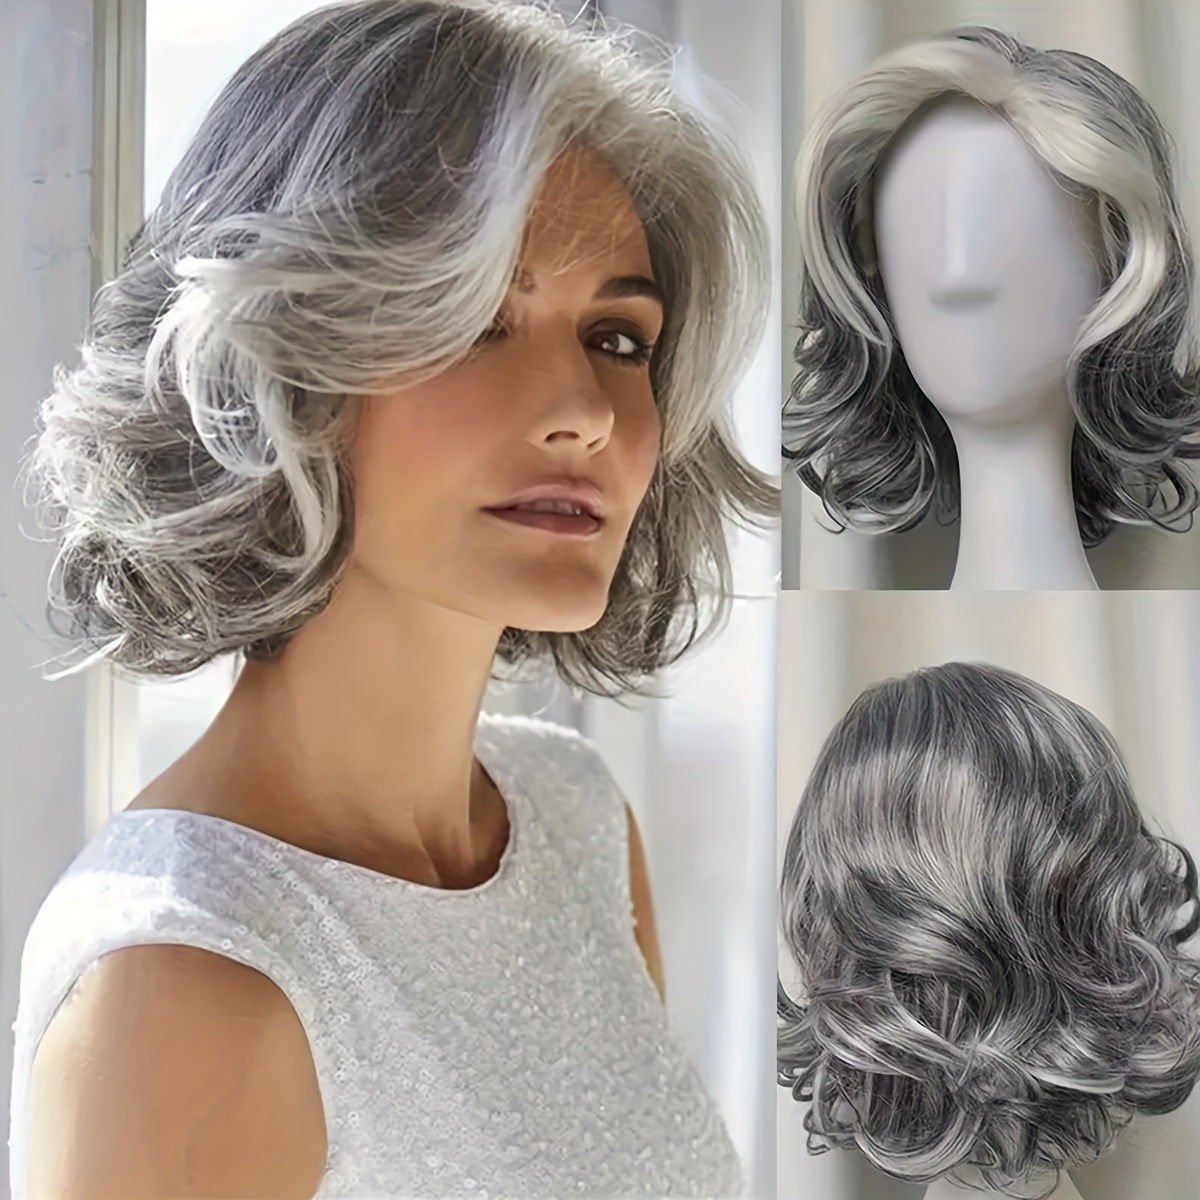 

12" Silvery White & Grey Wavy Wig - Mixed Shades, Full Synthetic Hair With Natural Appearance, Ideal For Daily Wear Or Roleplay, Short Length